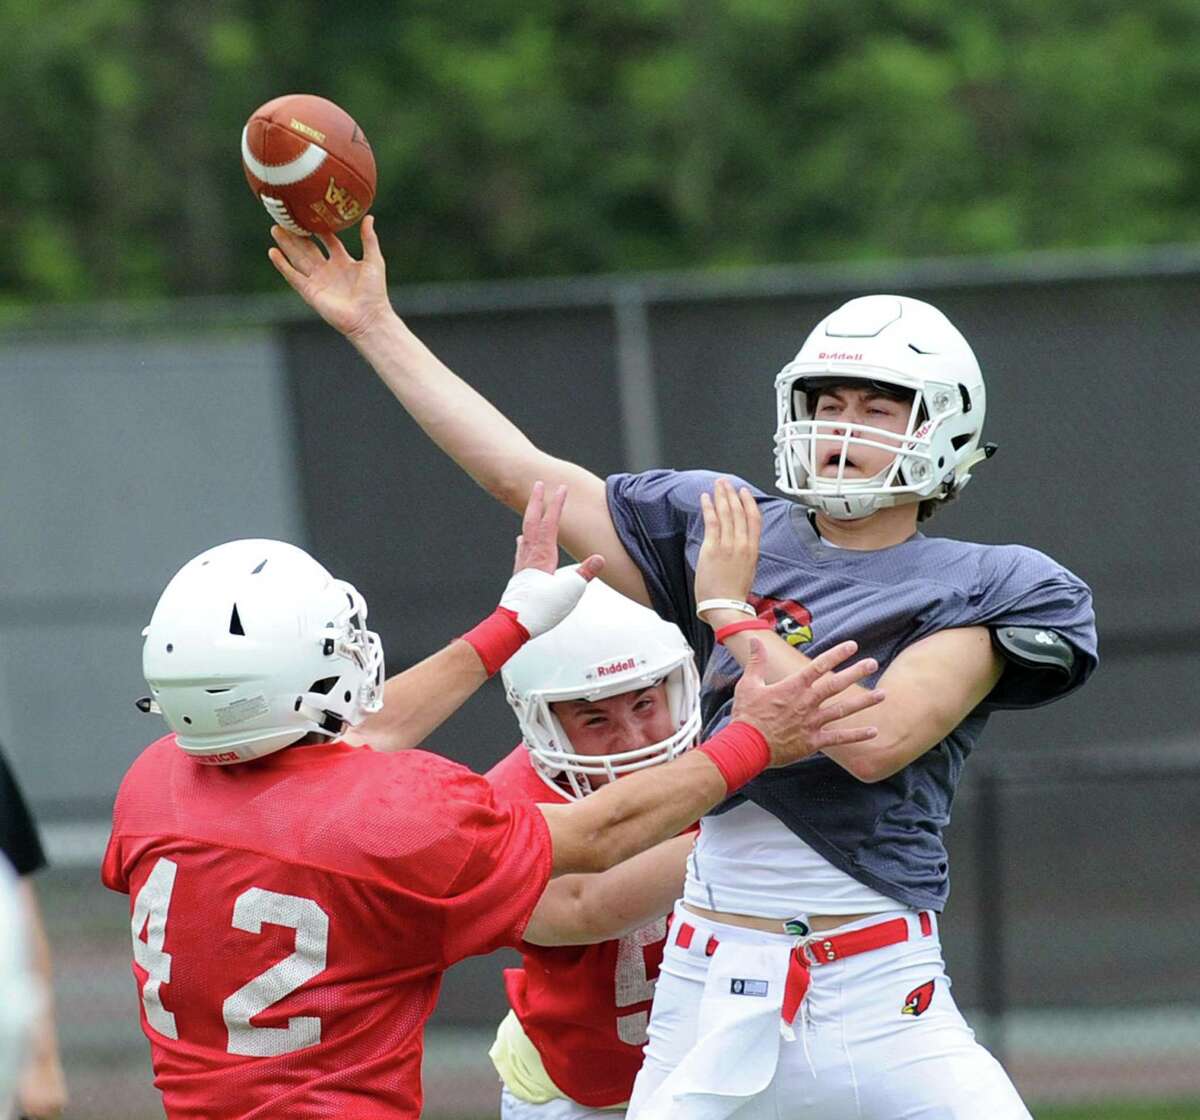 White quarterback Gavin Muir, right, just gets off a pass as he is pressured by two red players including Gramoz Bici (42) during the annual Greenwich High School Red vs. White spring scrimmage at Cardinal Stadium, Greenwich, Conn., Saturday, June 17, 2017.